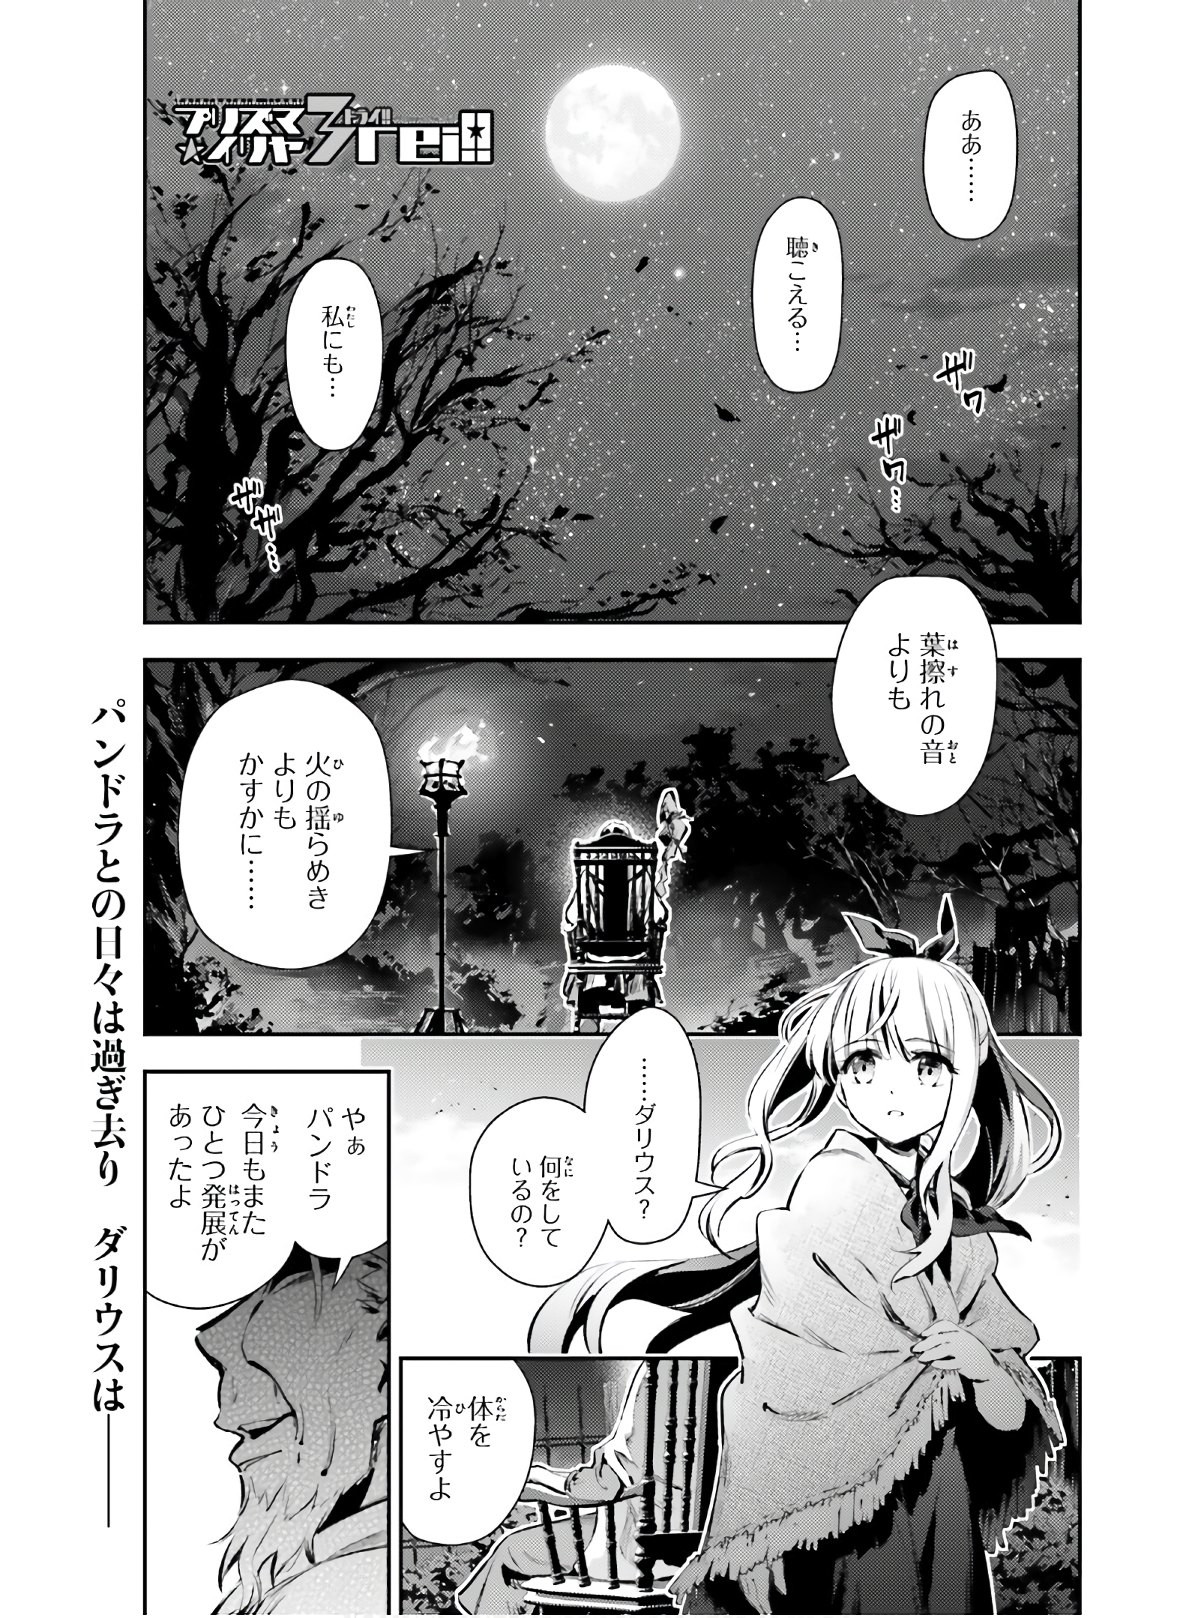 Fate/Kaleid Liner Prisma Illya Drei! - Chapter 65-1 - Page 1